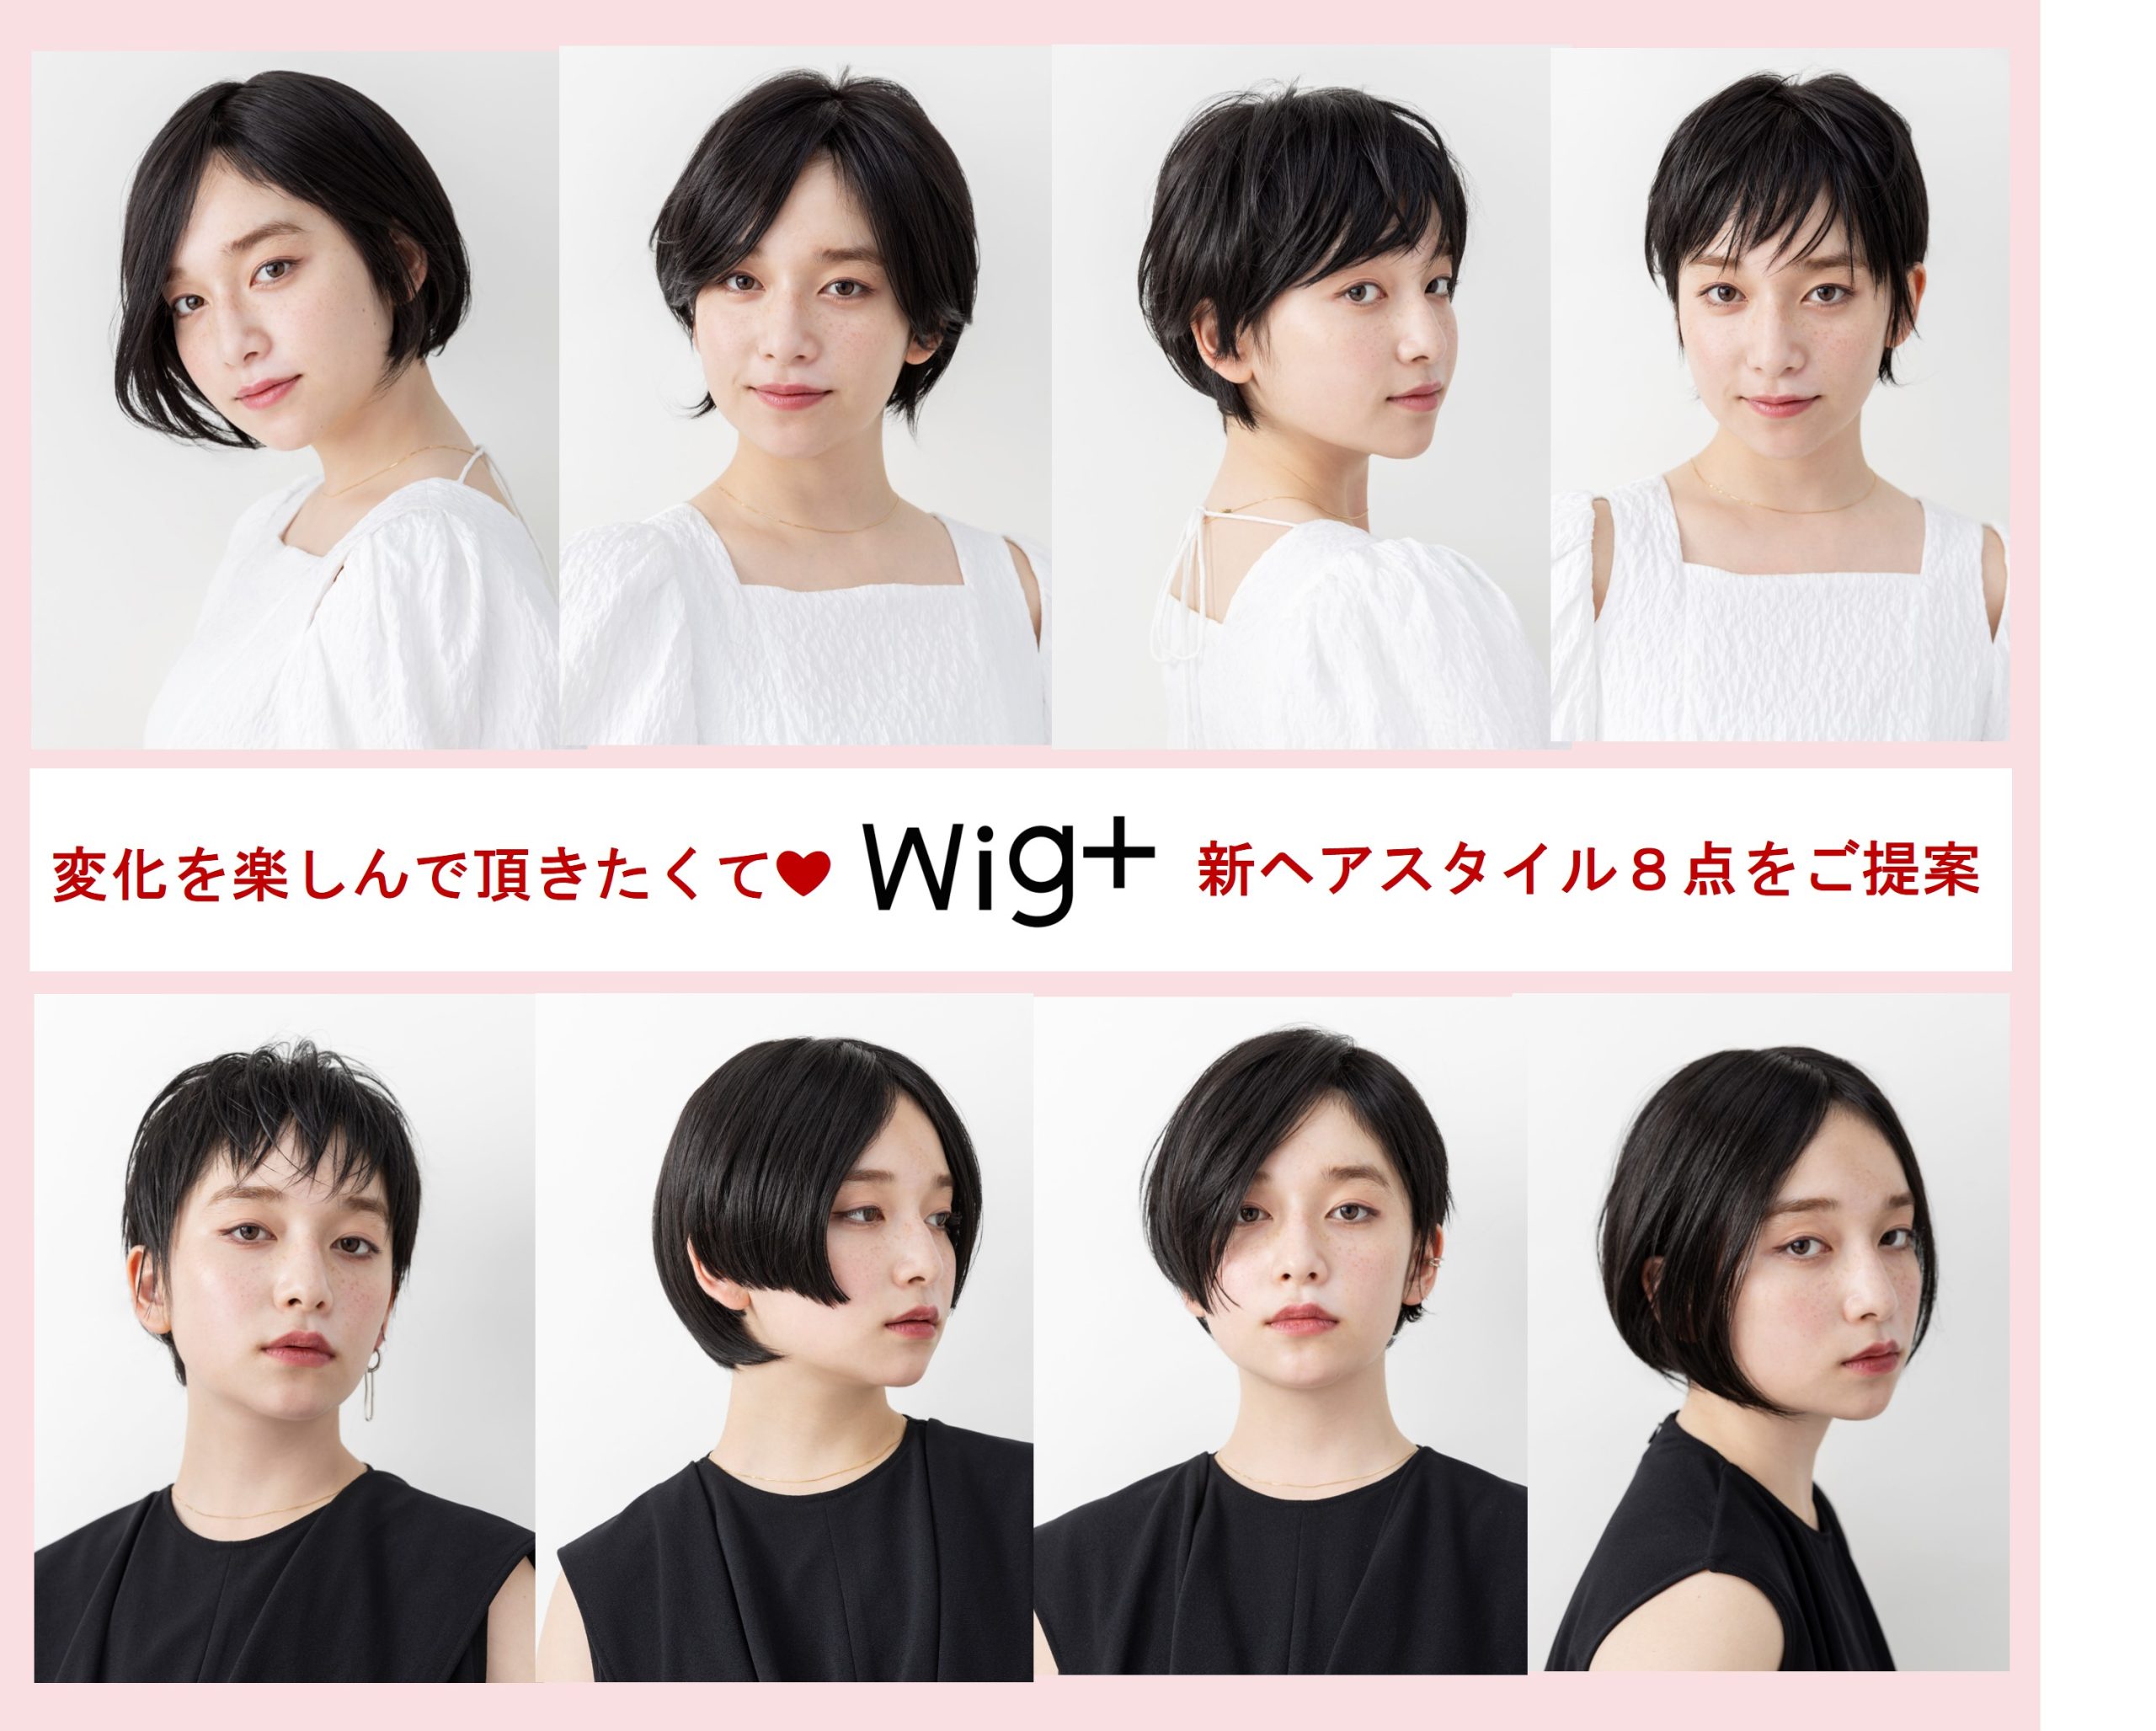 Social Contribution Activity Supported by Yoshiko Jinguji: New Styles for Medical Wigs and Videos on How to Create Them